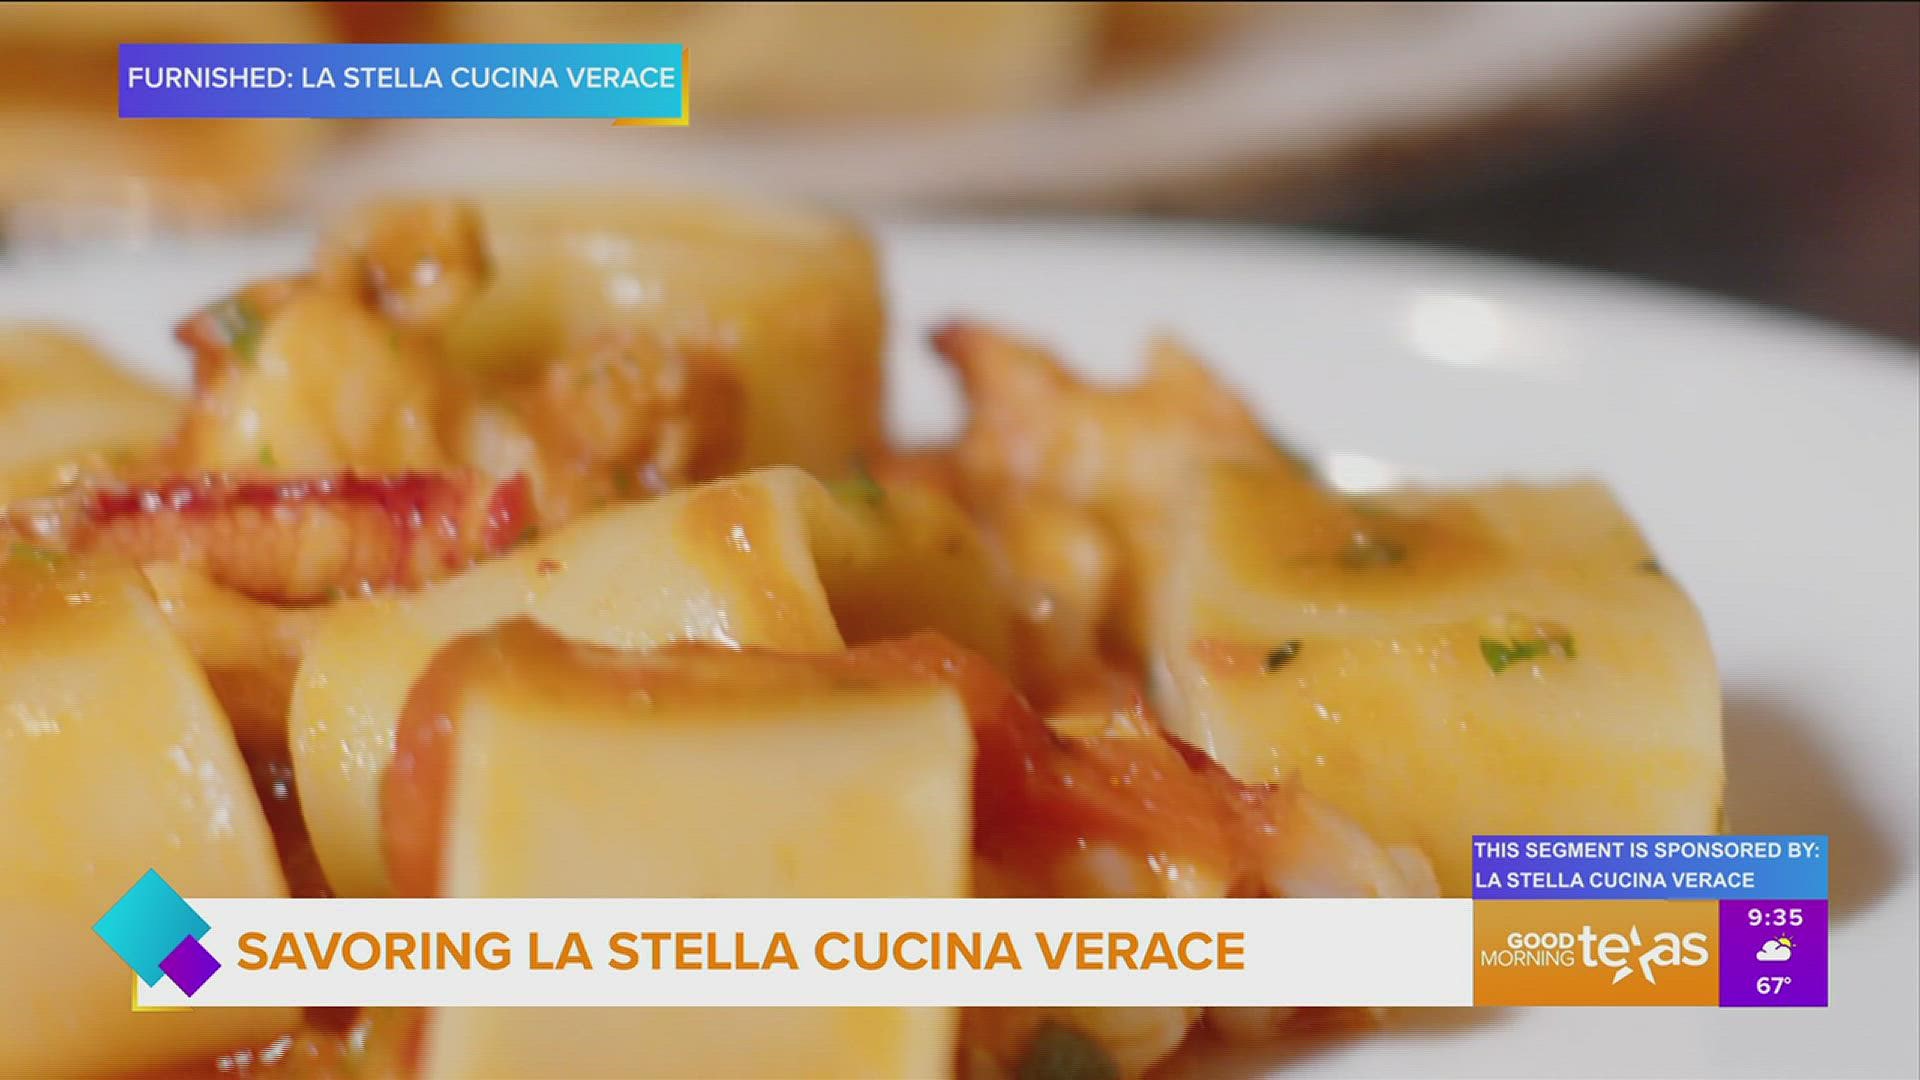 Nestled in the heart of the Dallas Arts District La Stella Cucina Verace honors old-world Italian roots, lifestyle and classic recipes with a modern twist.